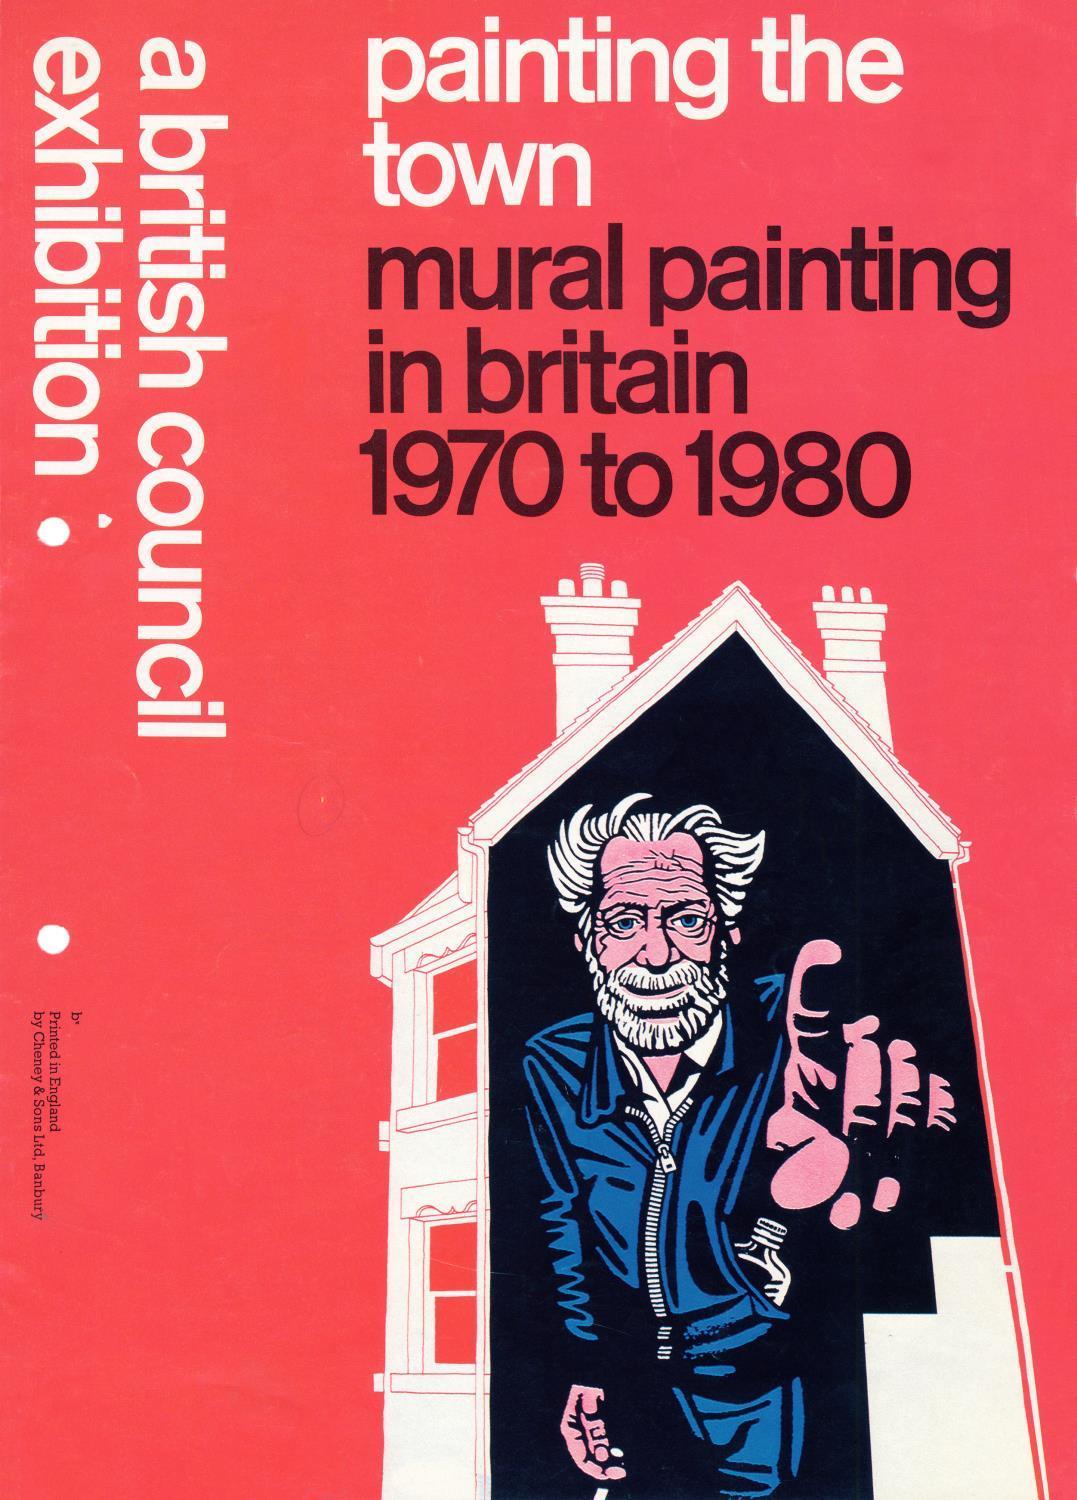 Painting the Town. Mural Painting in Britain. 1970 to 1980